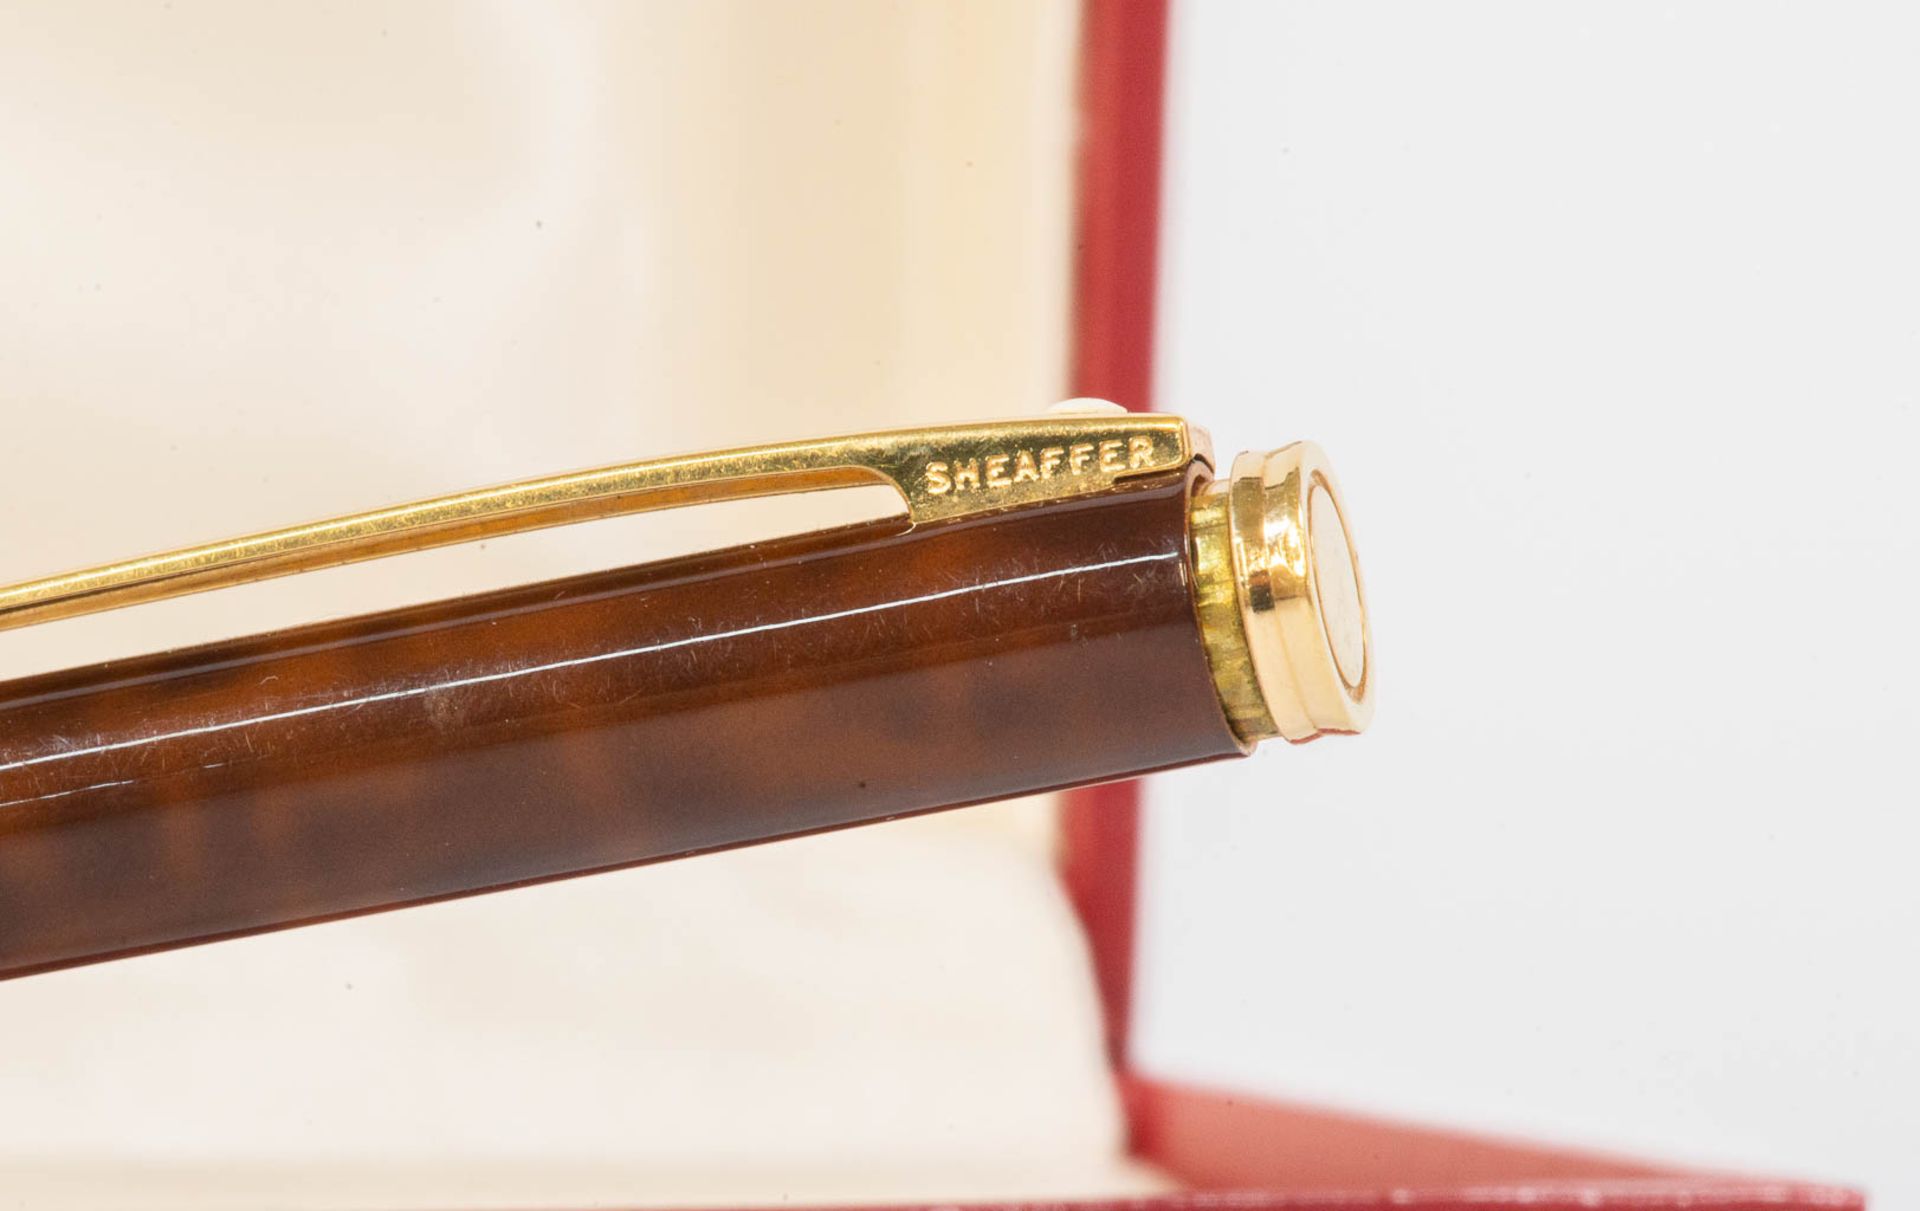 A Sheaffer fountain pen with 18kg gold nib, and a ballpoint pen in their original case. - Image 8 of 11